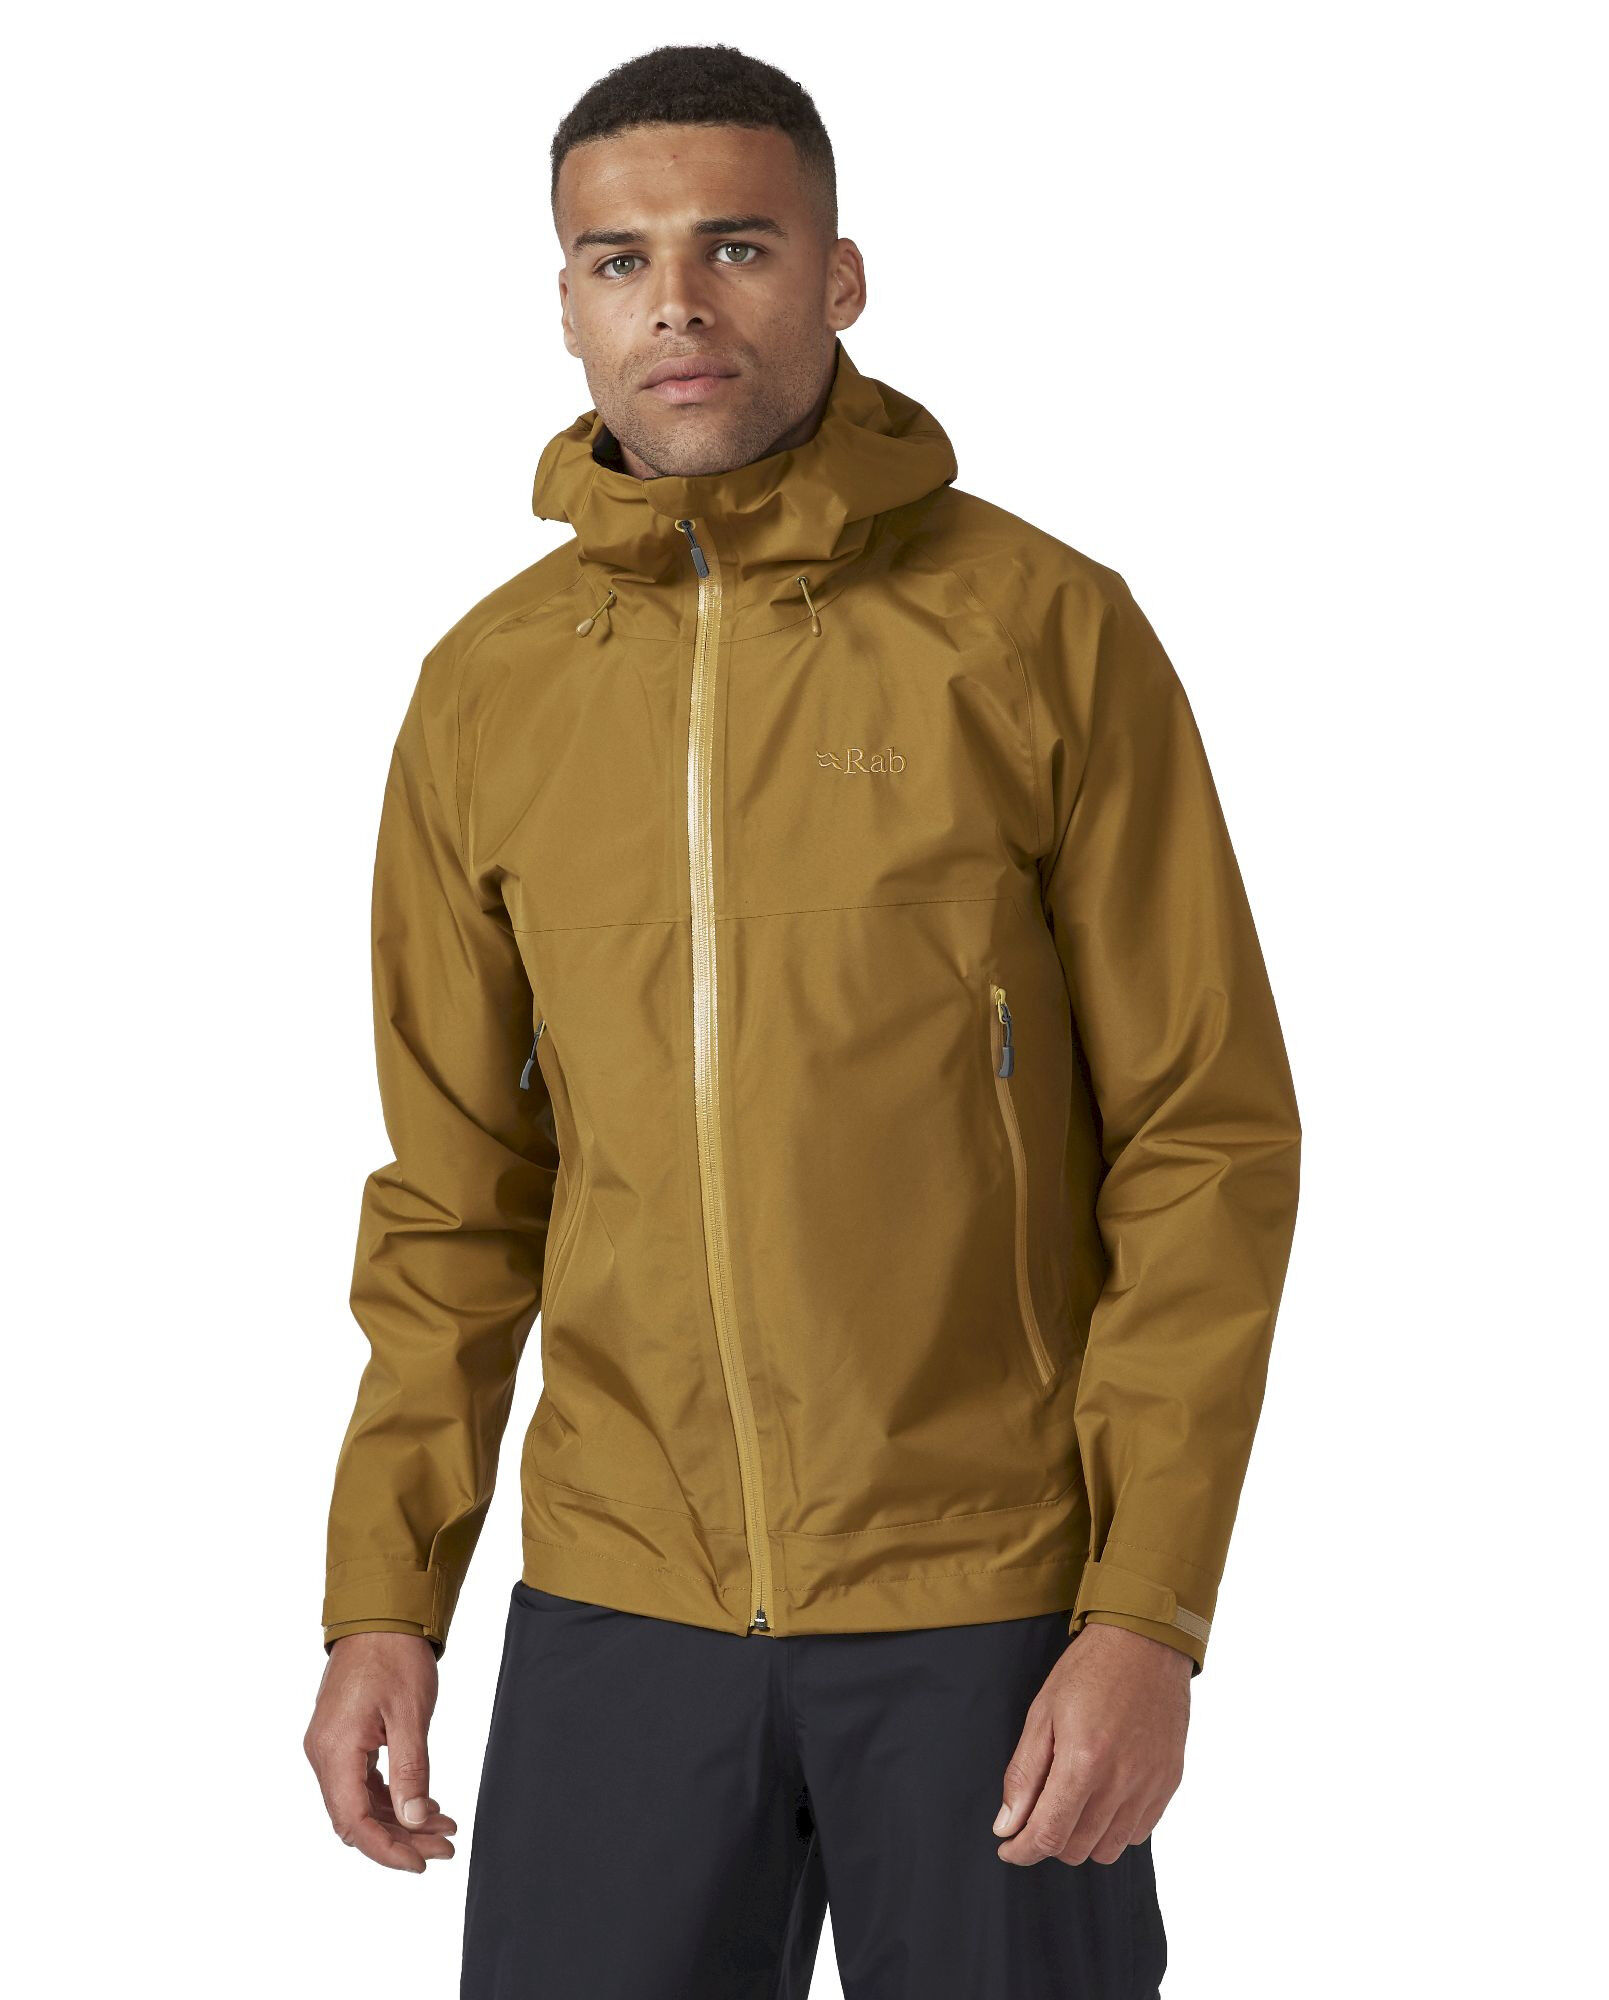 Rab Namche Paclite Jacket - Chaqueta impermeable - Hombre | Hardloop